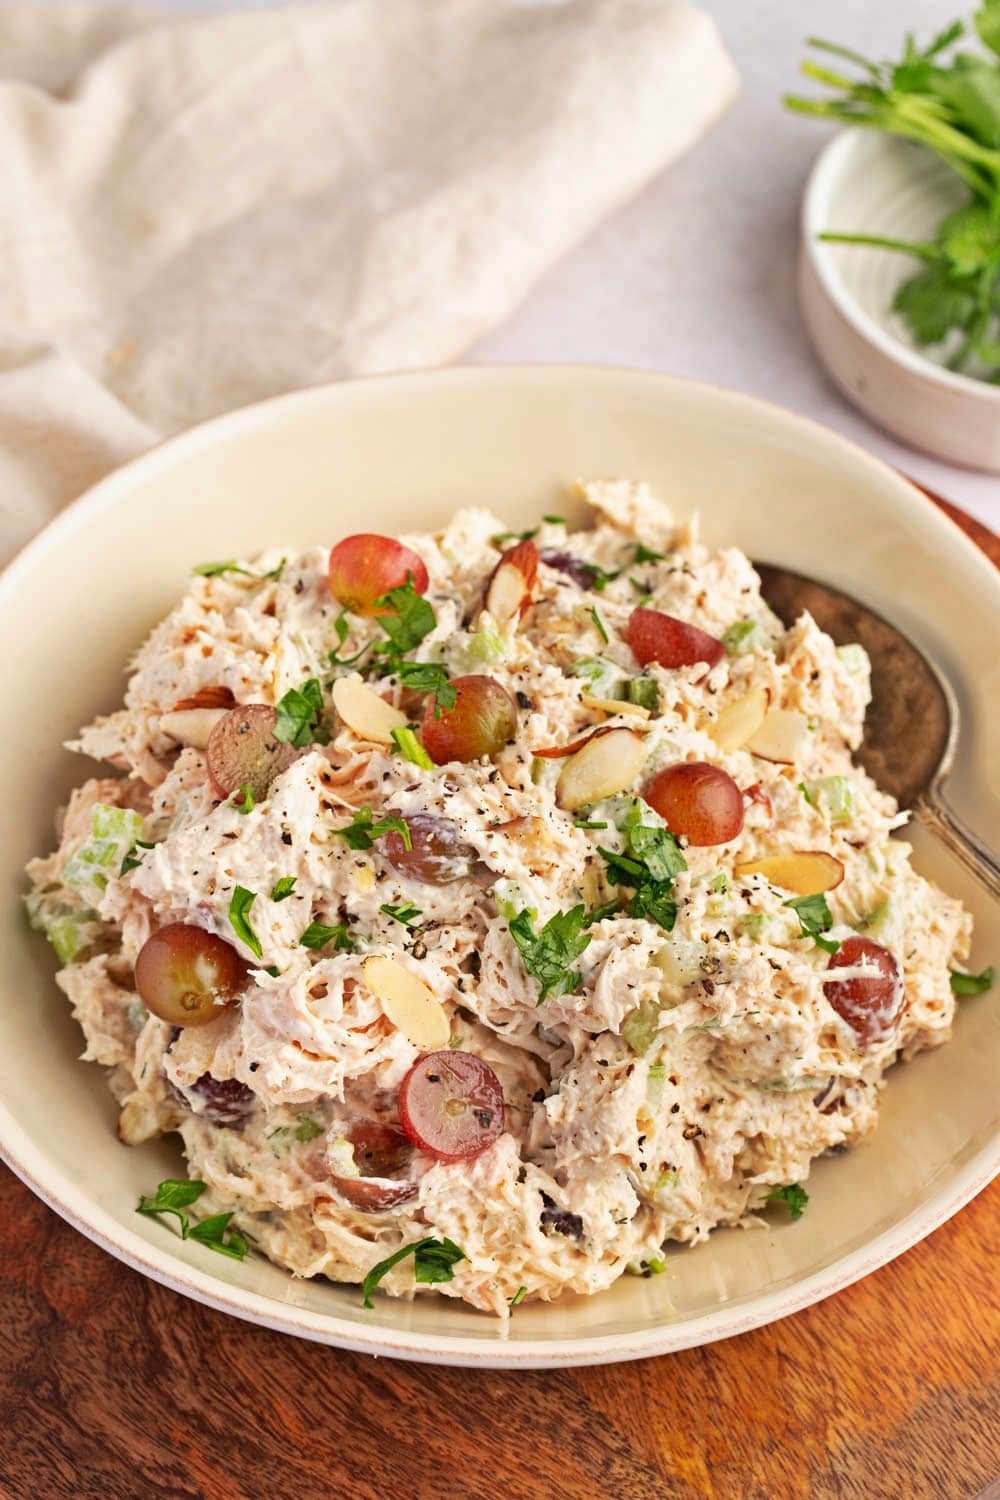 Homemade Rich and Creamy Rotisserie Chicken Salad with Grapes